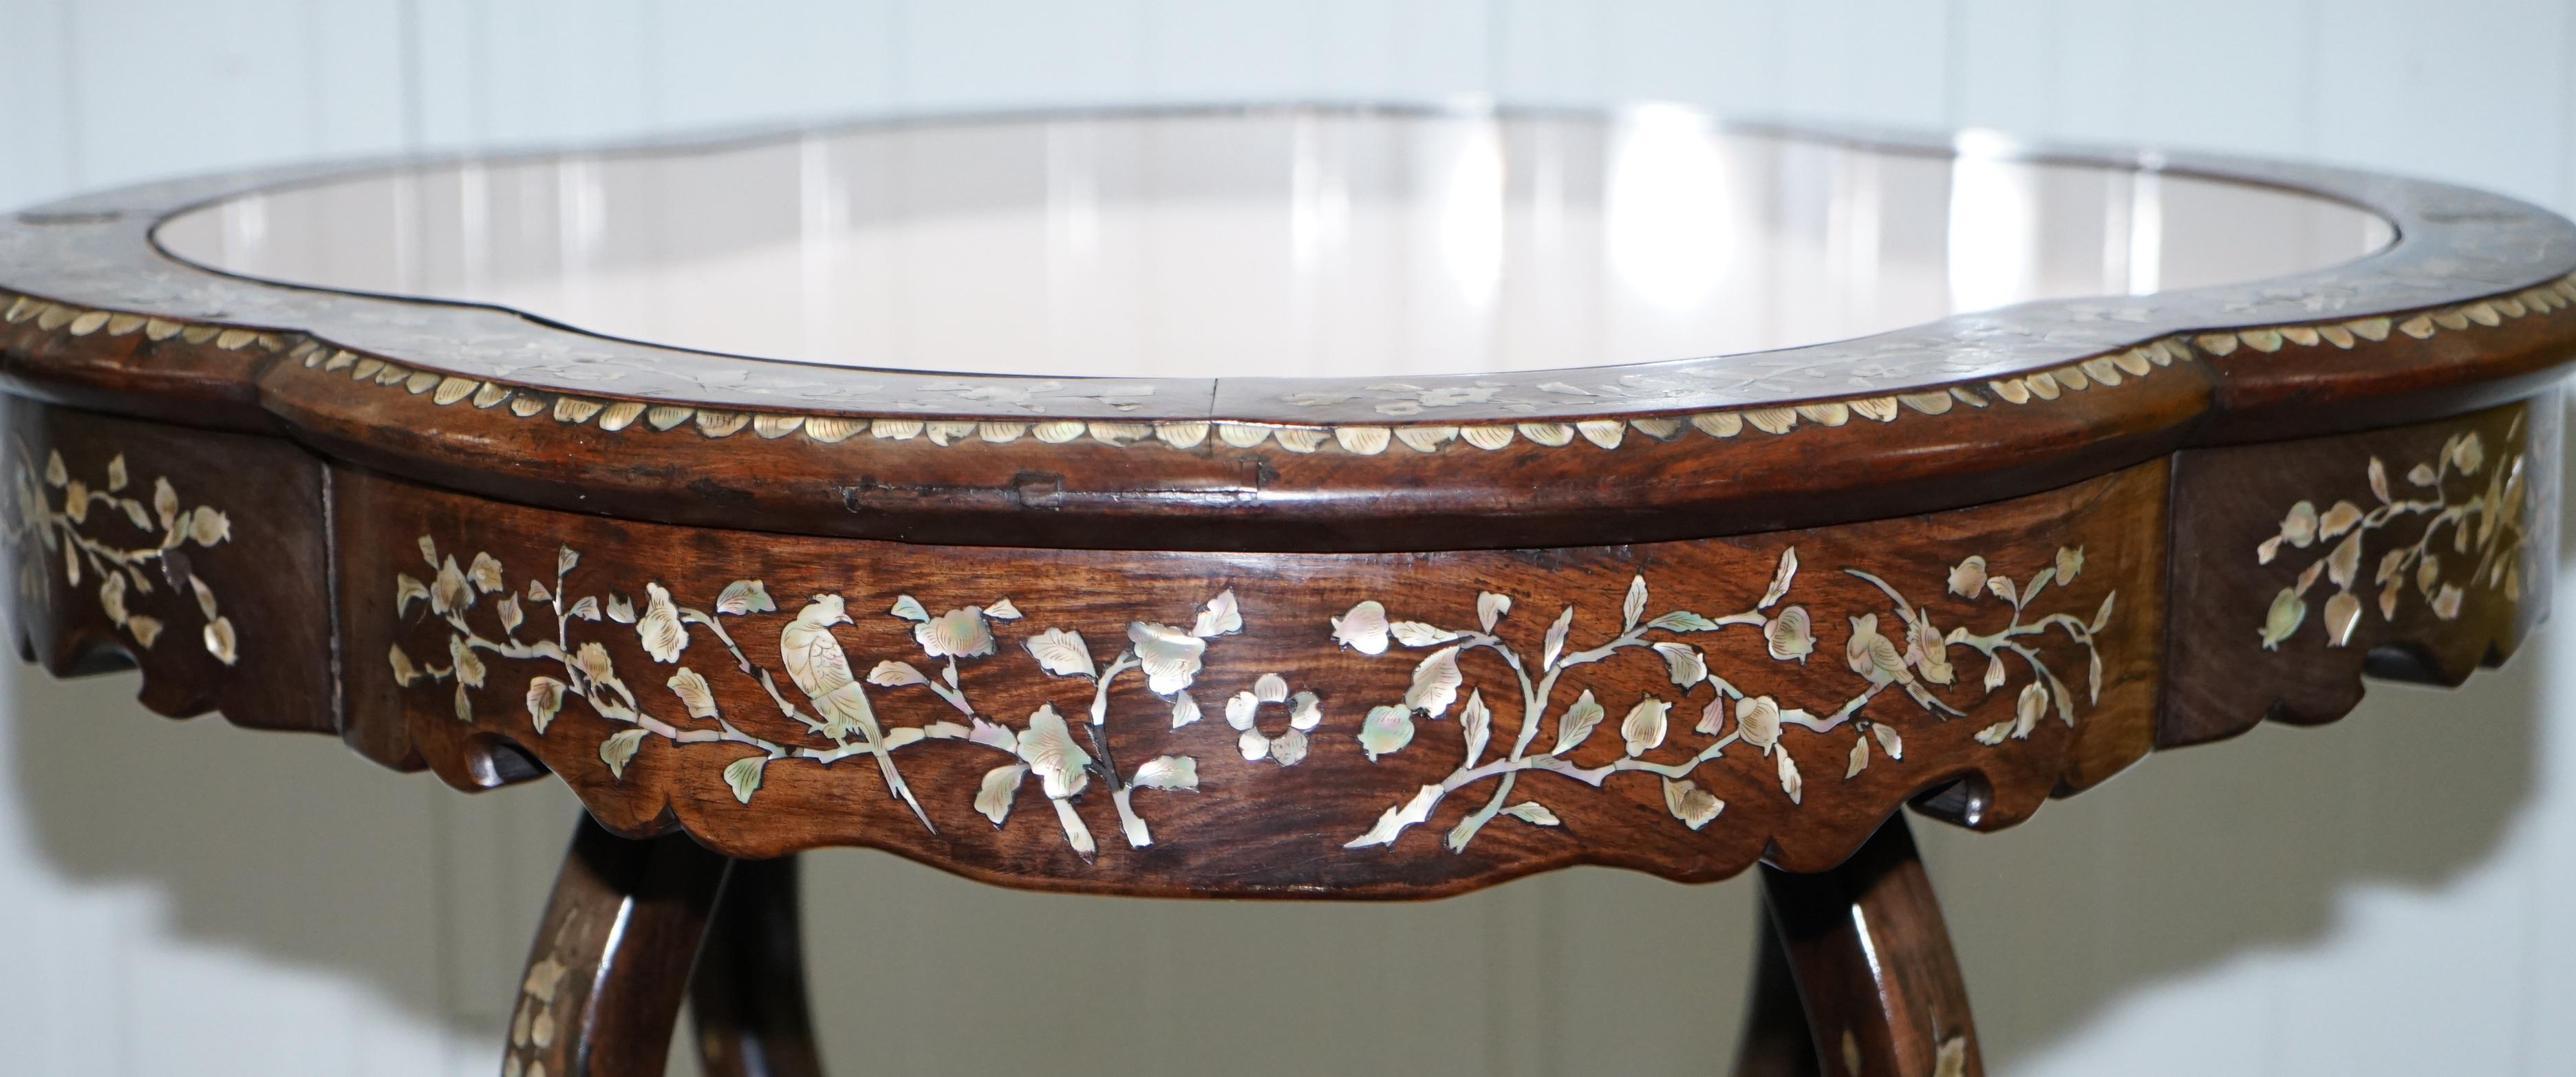 1924 British Empire Chinese Exhibition Rosewood & Mother of Pearl Inlaid Table 4